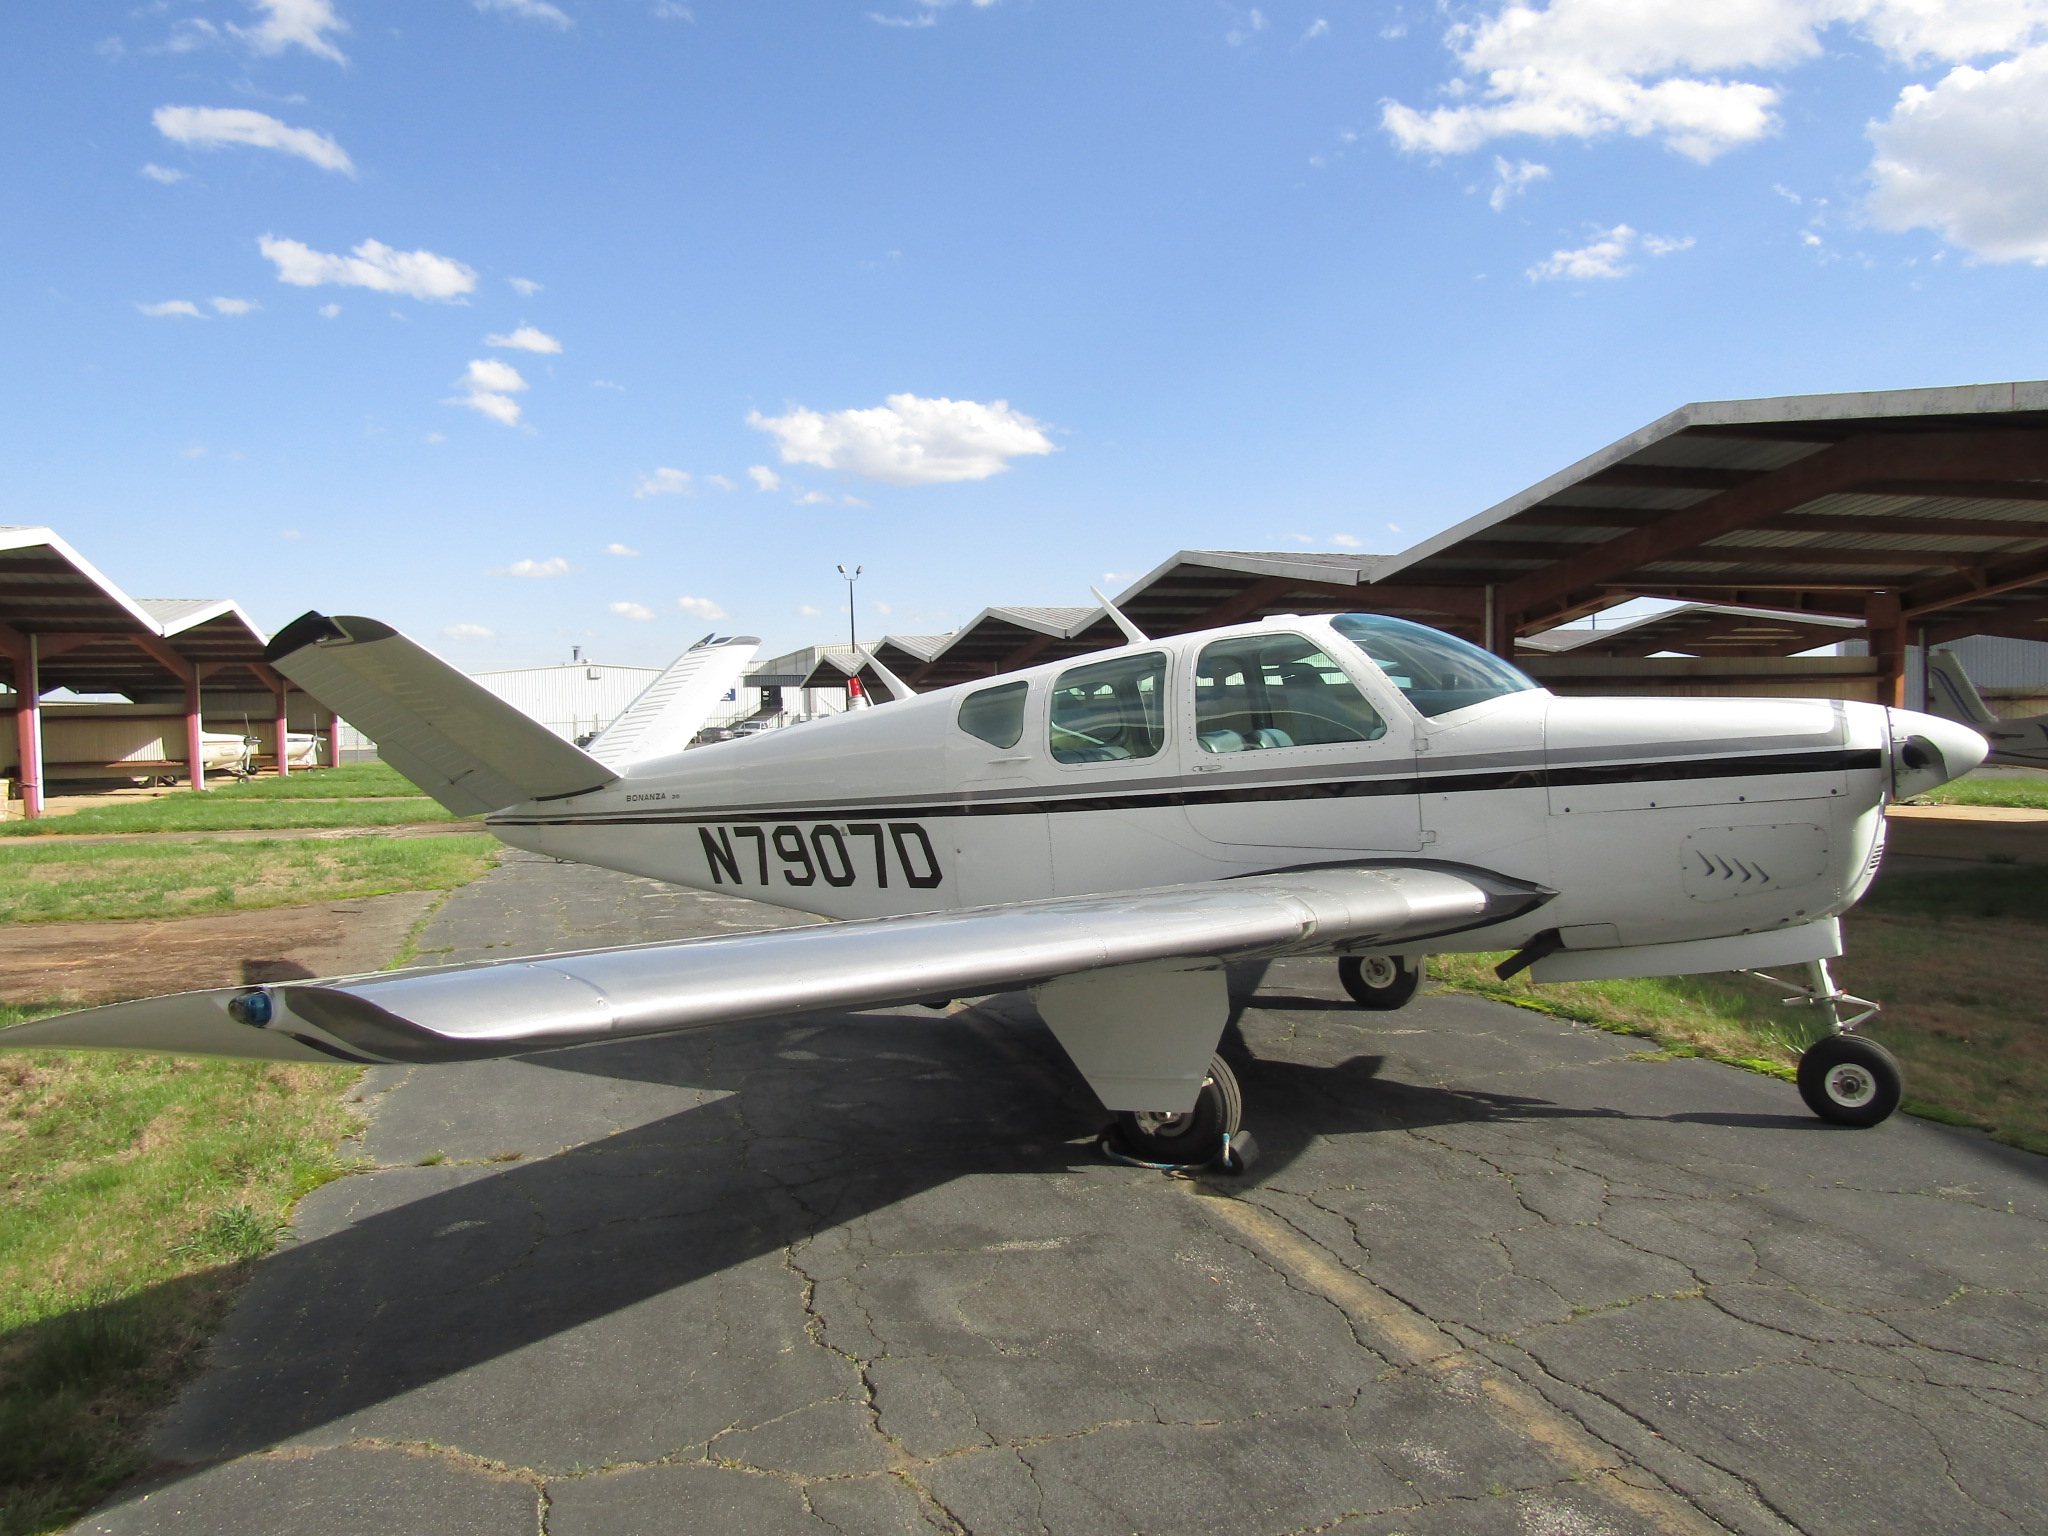 1957 Beechcraft Bonanza H35 Single Engine Piston Airplane For Sale (N7907D) From Carolina Aircraft On AvPay aircraft exterior front right close